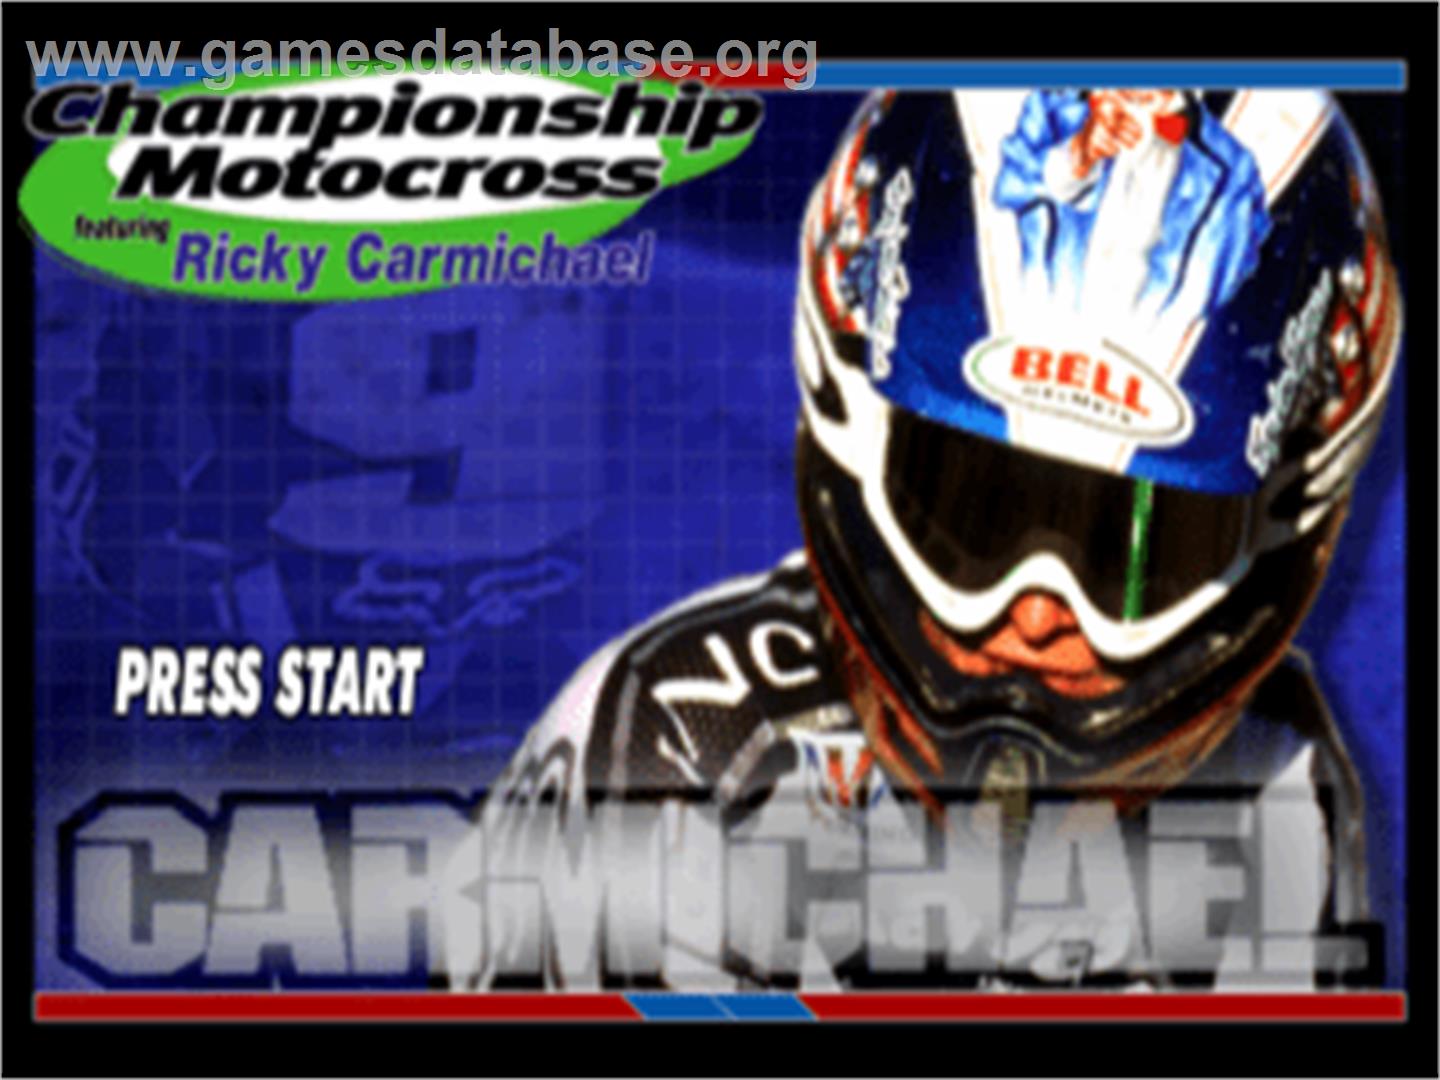 Championship Motocross Featuring Ricky Carmichael - Sony Playstation - Artwork - Title Screen